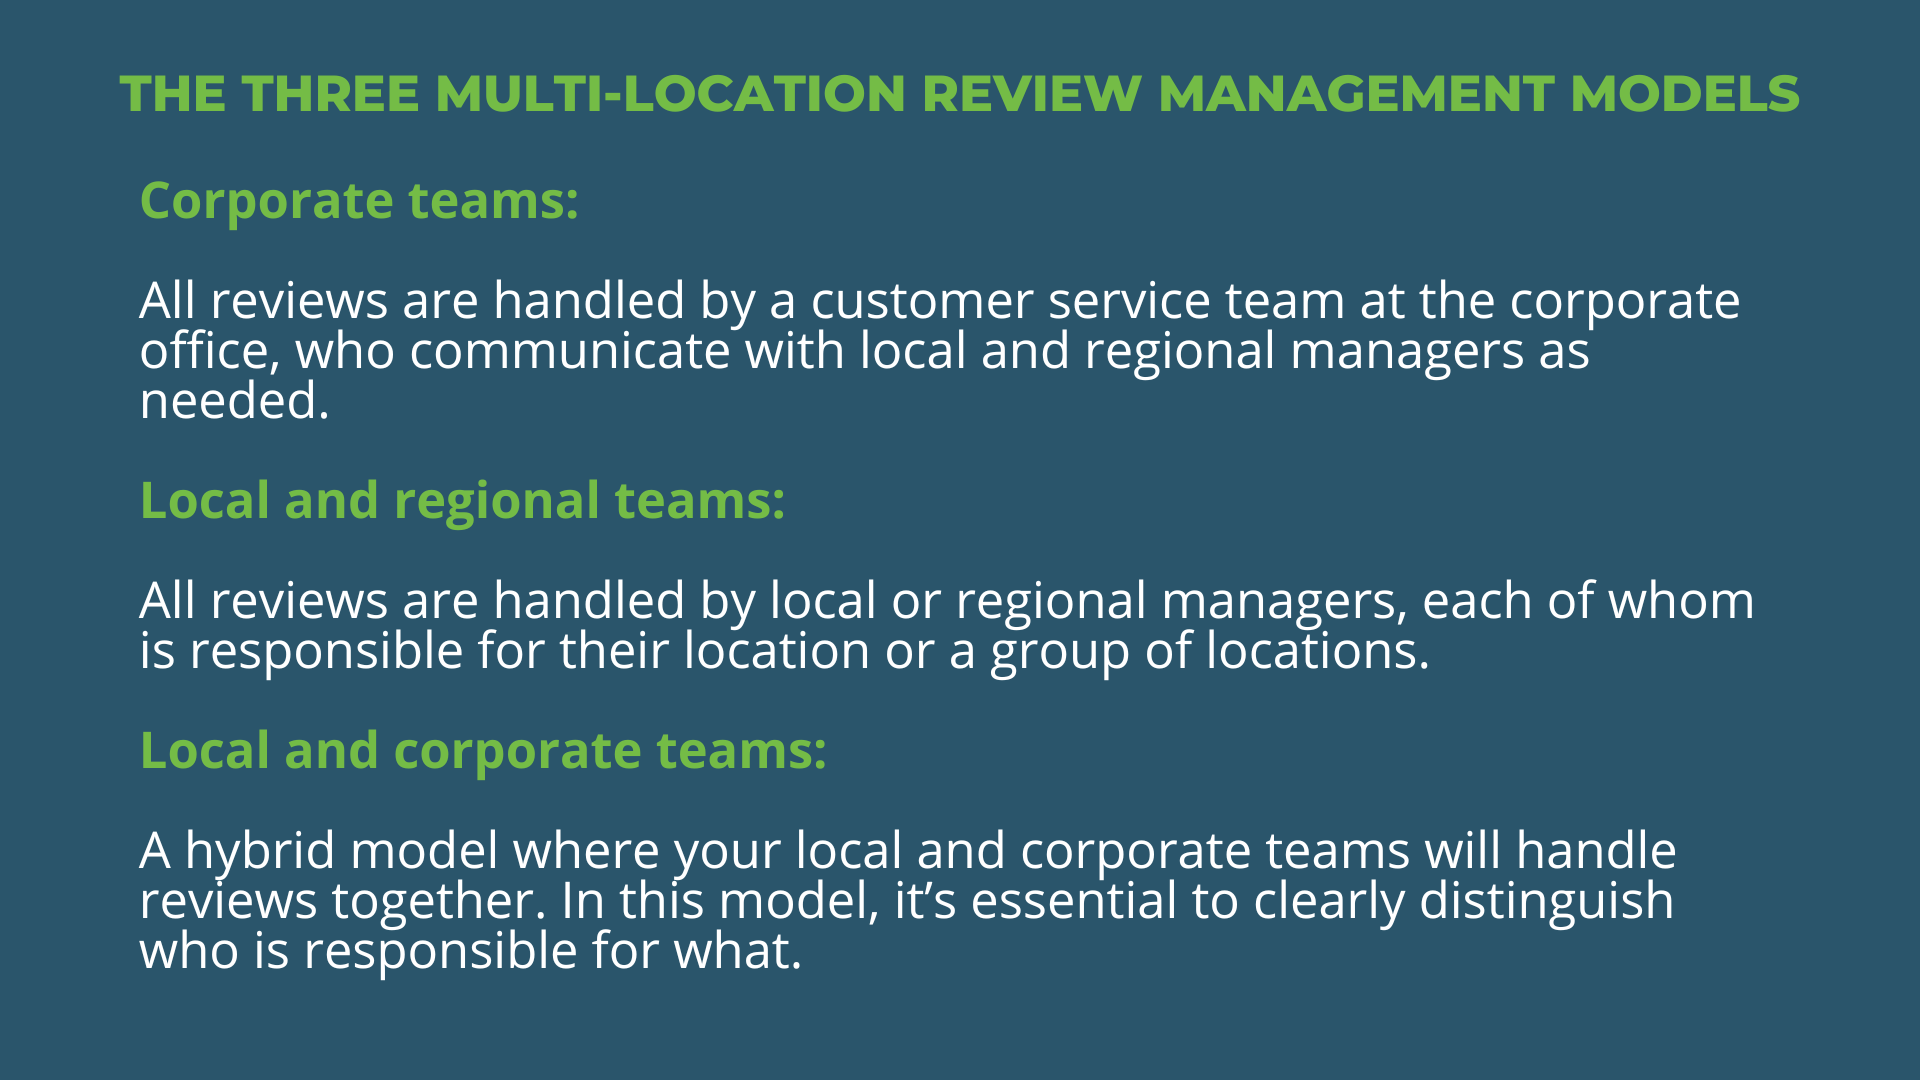 Green header and a mix of green and white text below explaining the three multi-location review management models on a dark blue background.